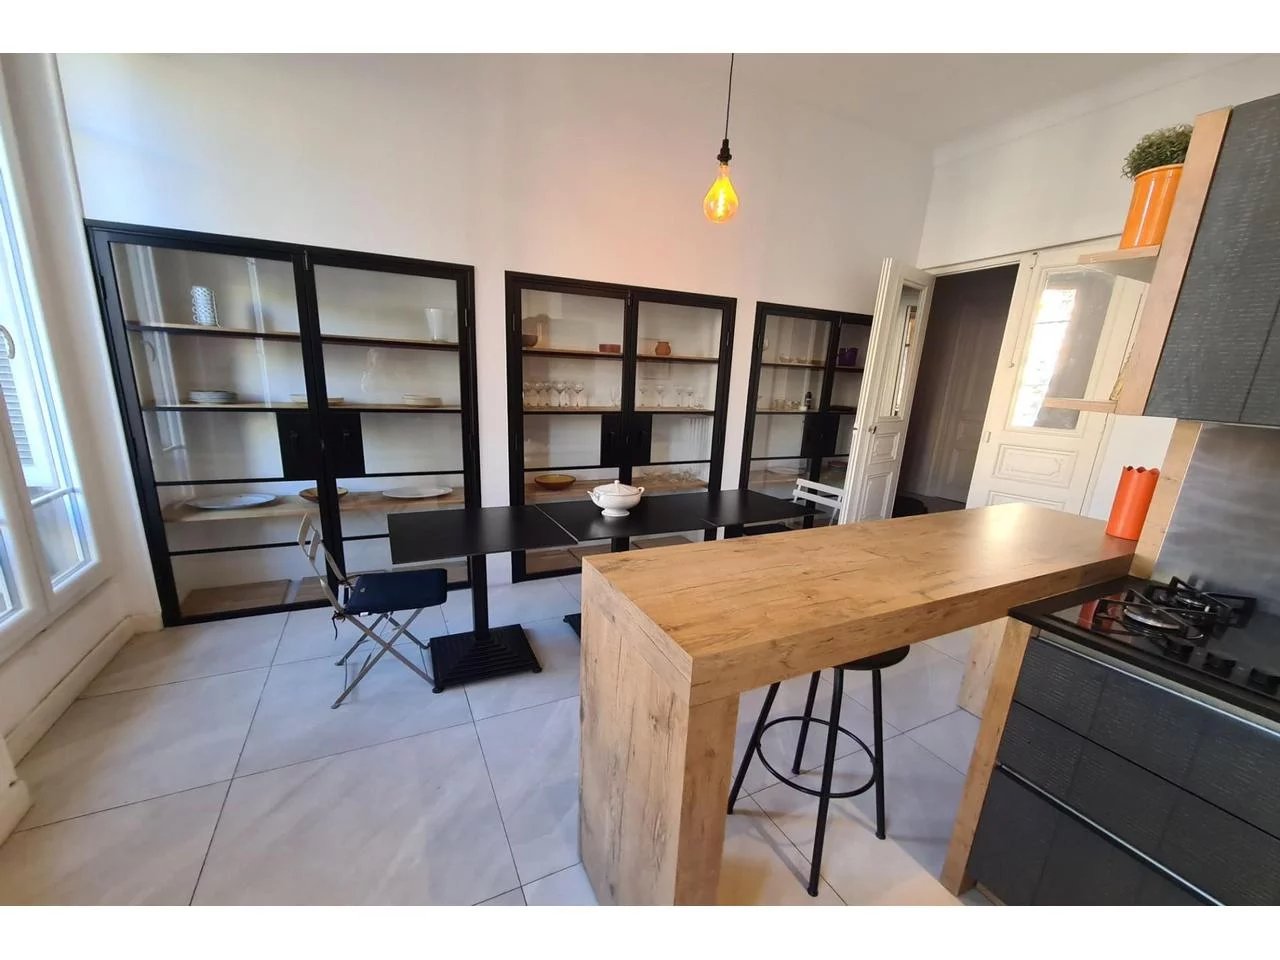 Appartement  4 Rooms 108.2m2  for sale   740 000 €